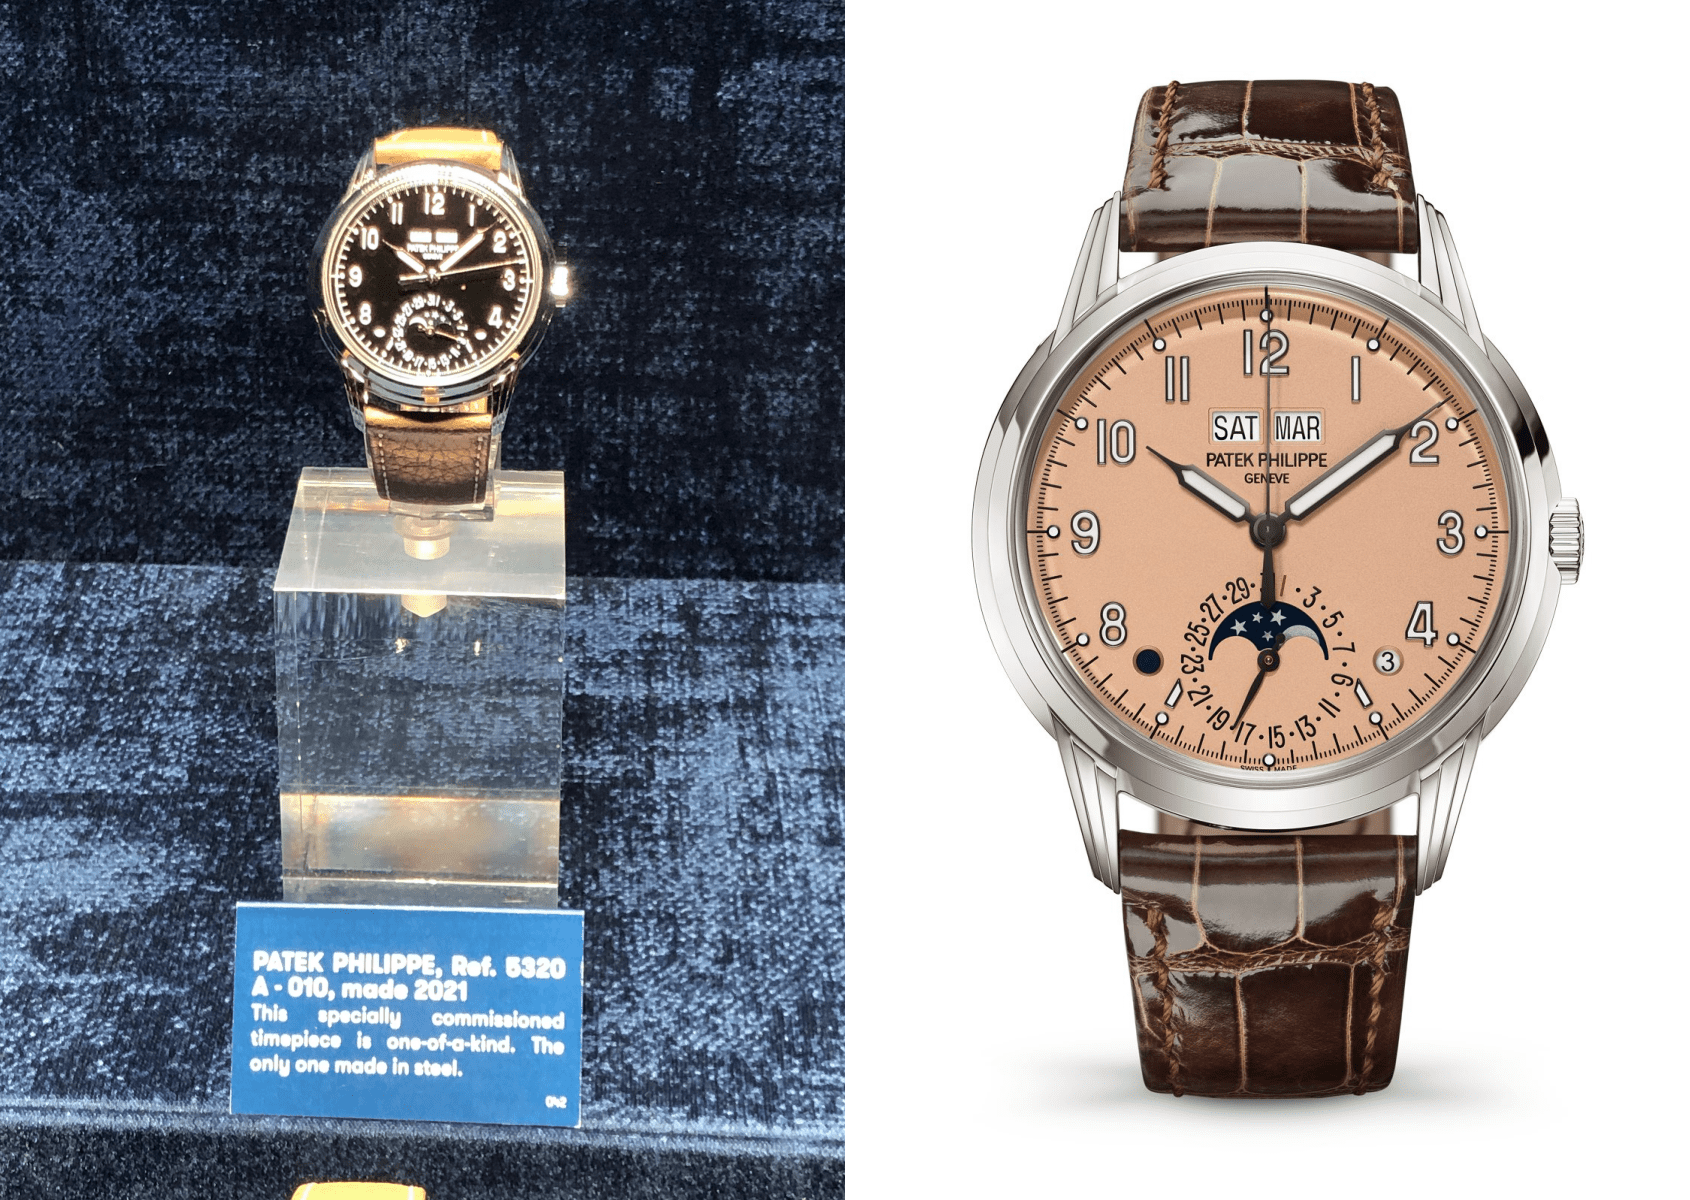 THE BIG INTERVIEW: Patrick Getreide Reveals The Secrets Behind His Mighty  OAK Watch Collection